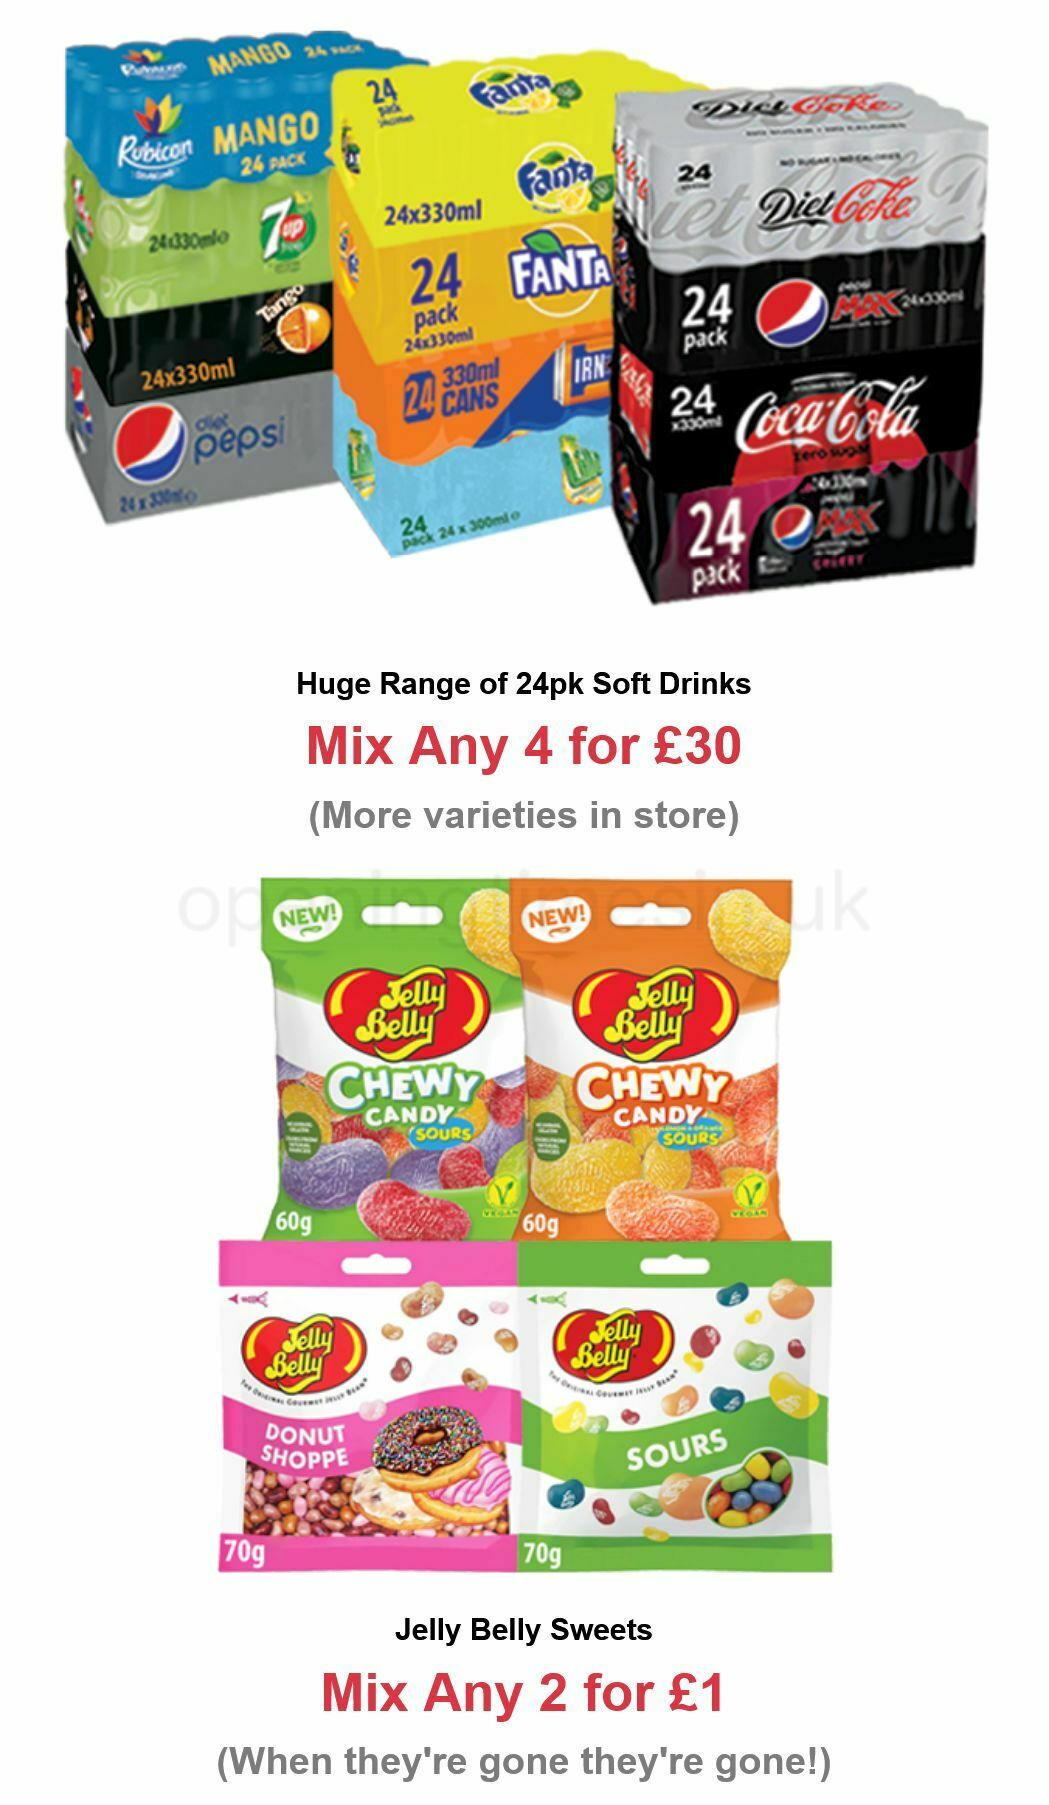 Farmfoods Offers from 22 February